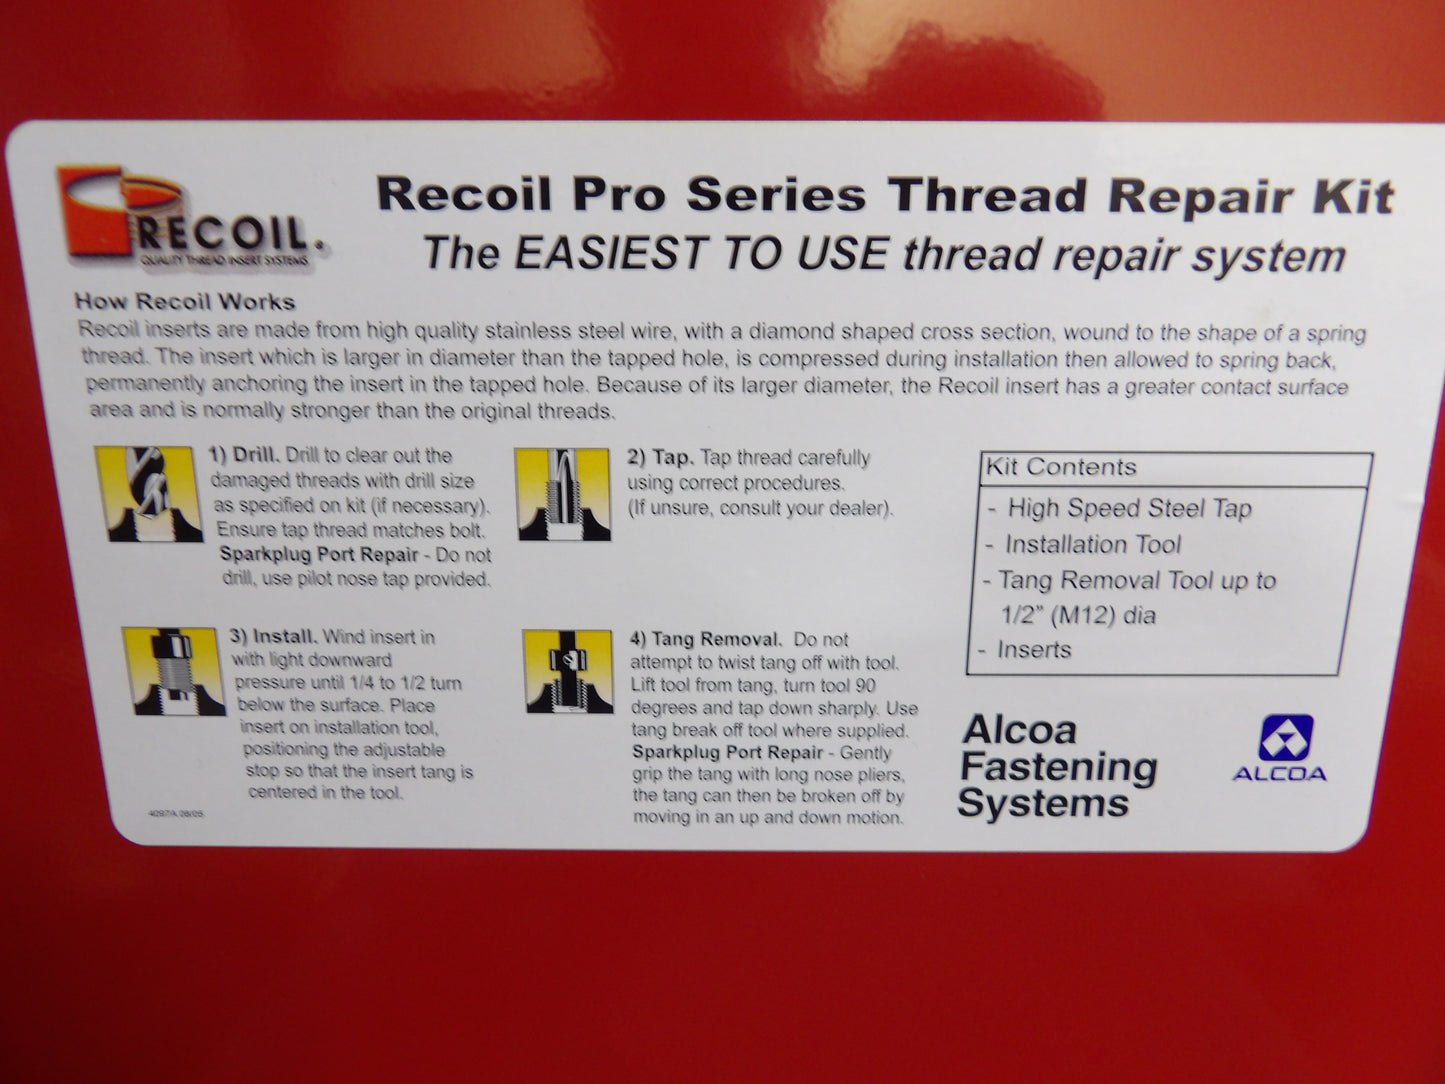 Recoil Pro Series 304 Stainless Steel Helical Thread Repair Kit, 7/8-14 Size, 1.313 in Length (CR00801-WTA22)